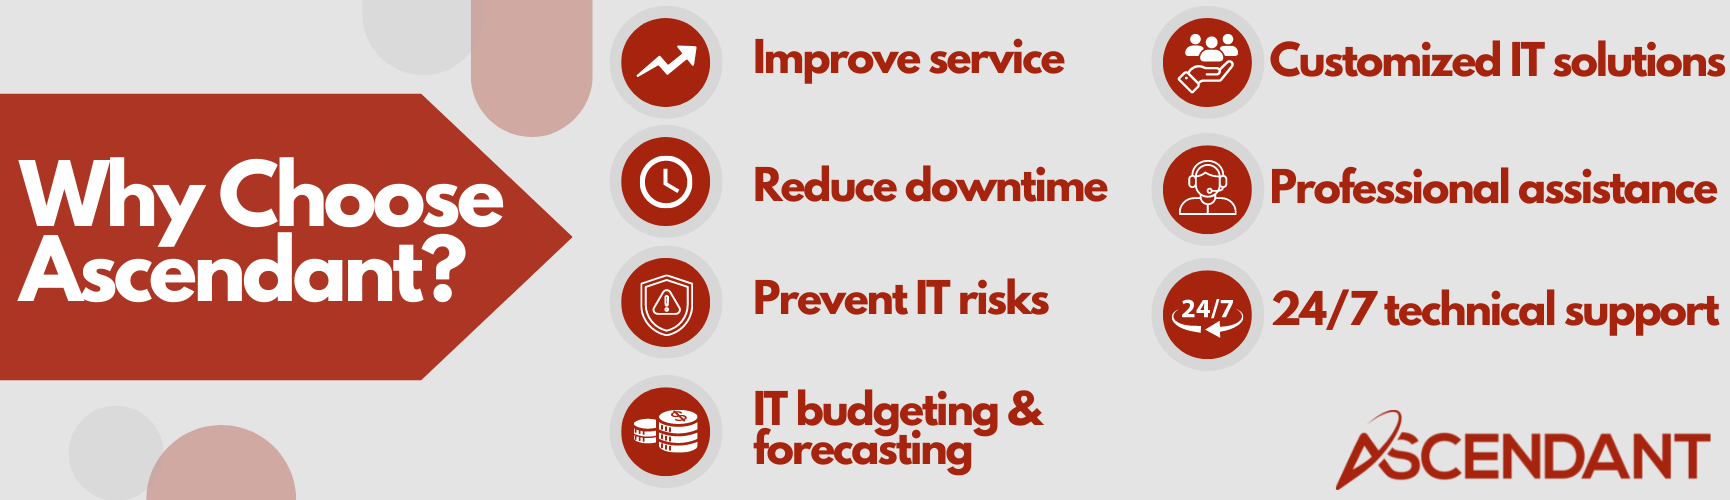 Why choose ascendant as your managed IT service provider in NJ